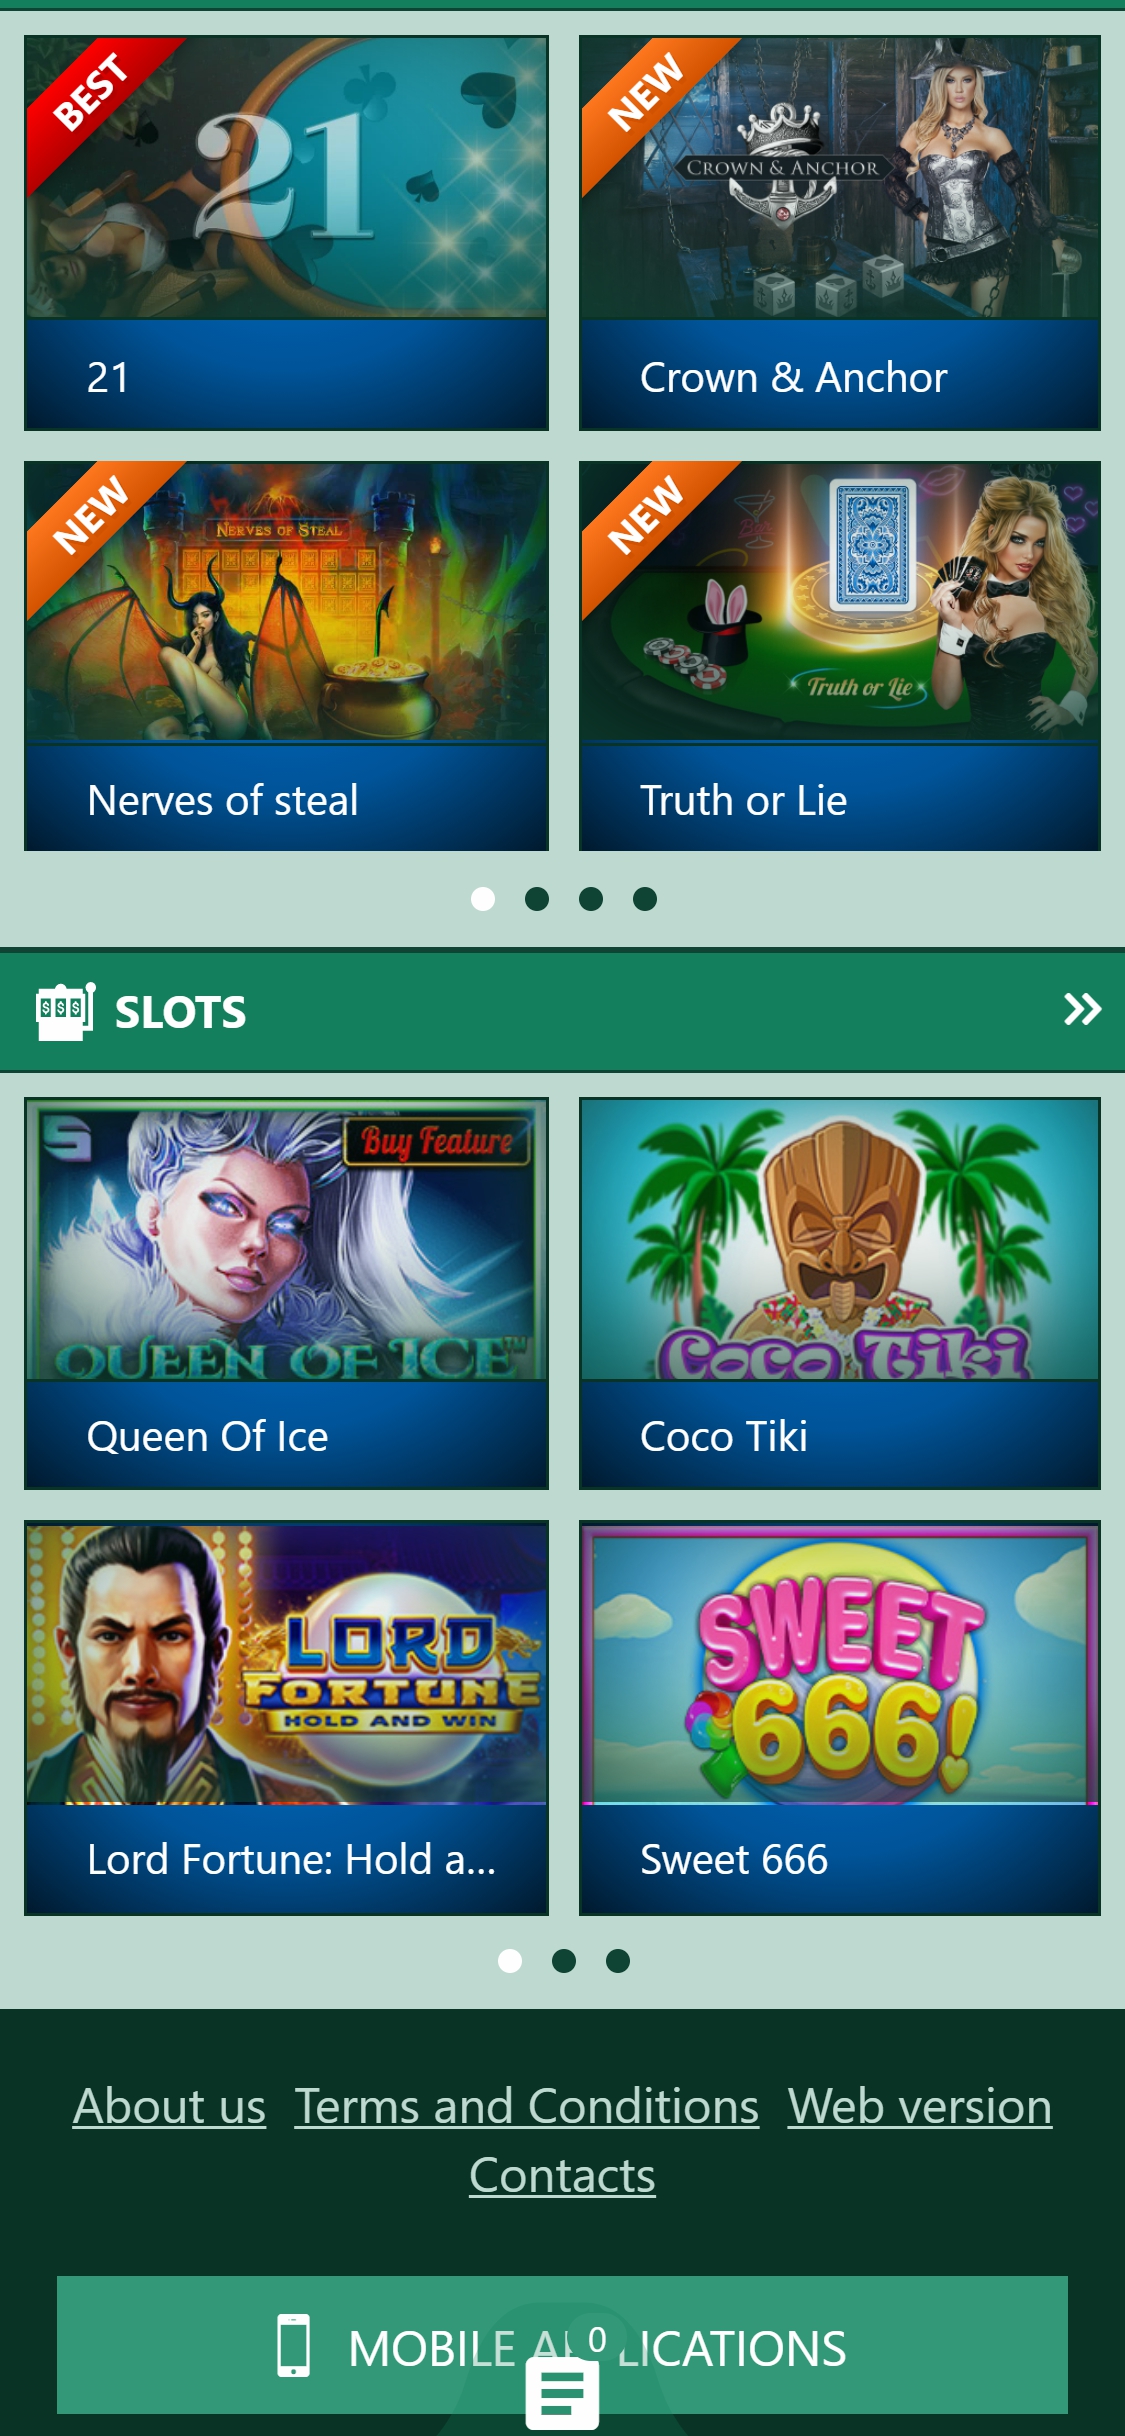 BetWinner Casino Mobile Games Review